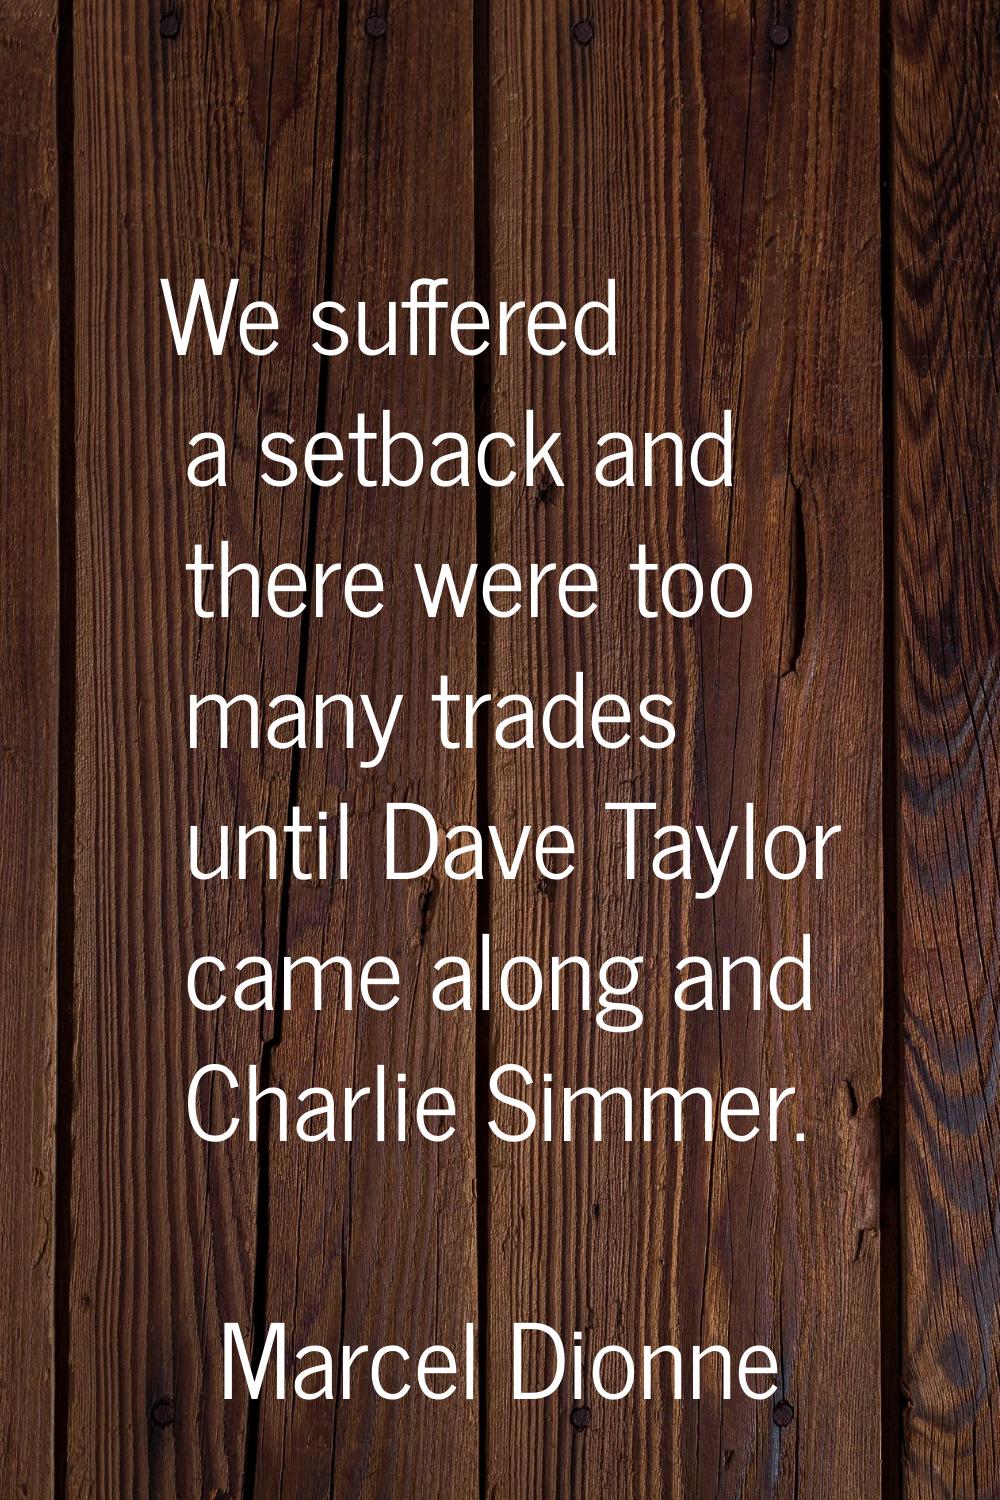 We suffered a setback and there were too many trades until Dave Taylor came along and Charlie Simme